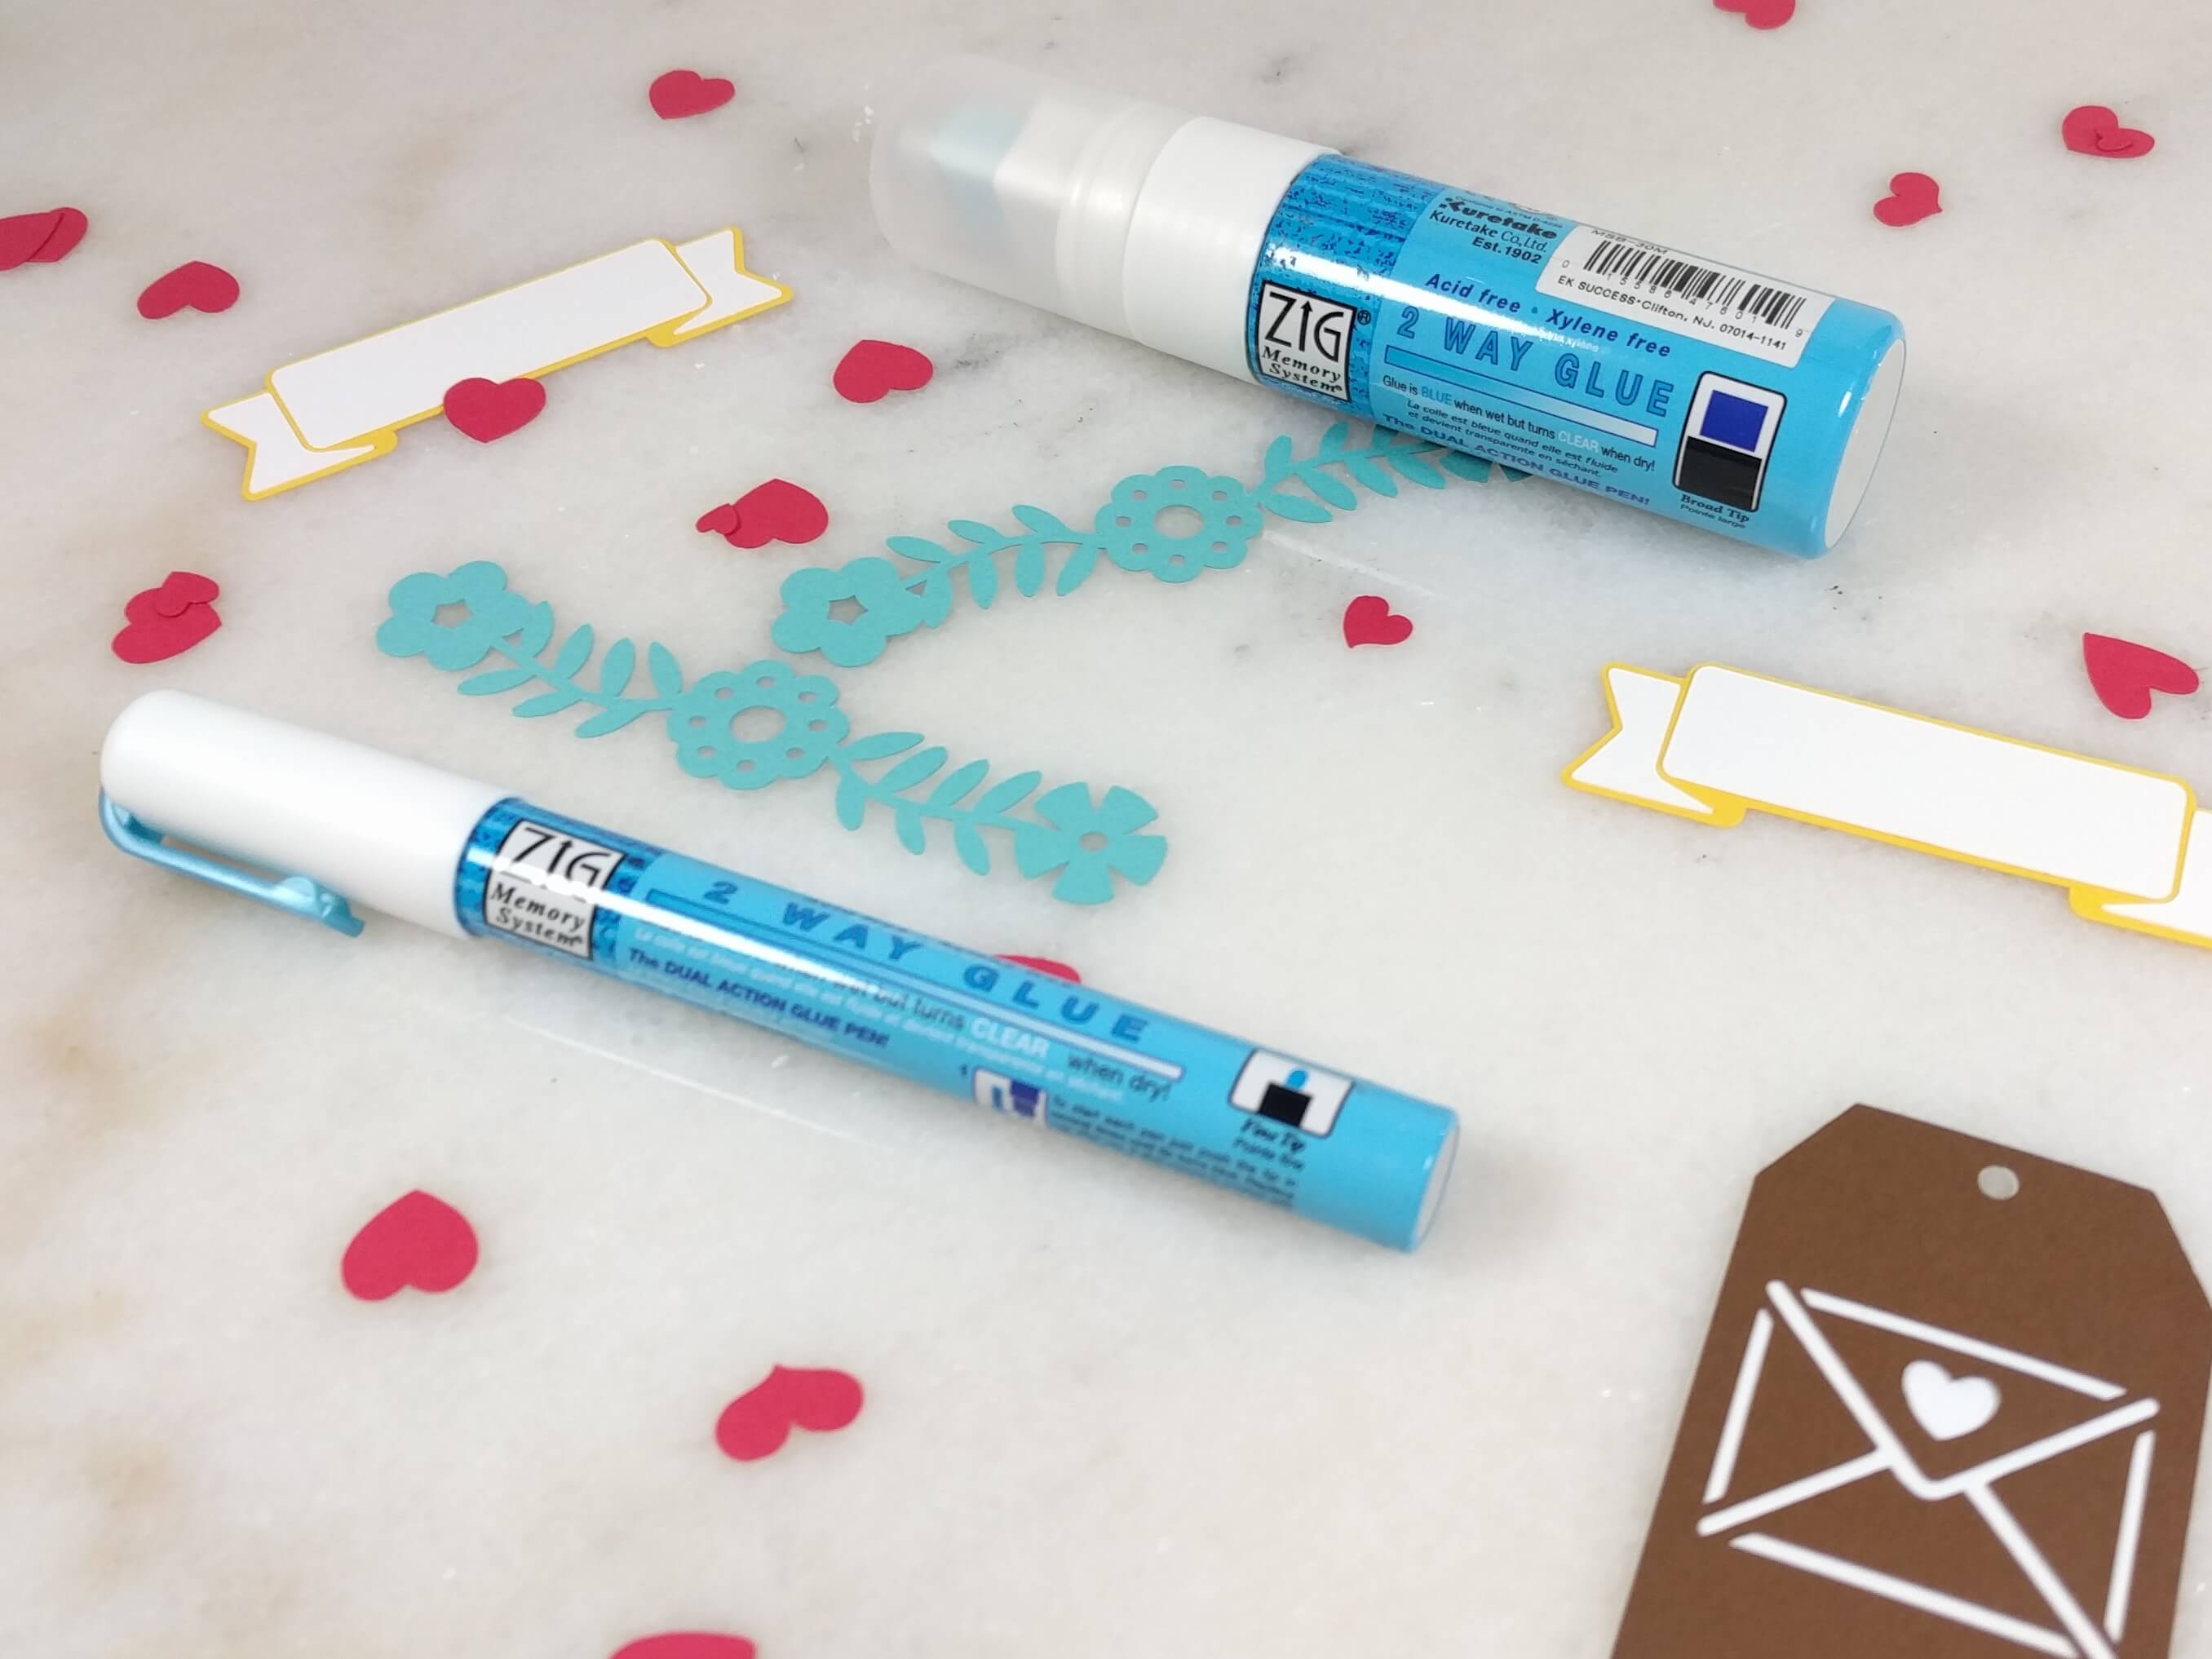 Best Tips on Choosing the Best Glue for Card Making – Altenew